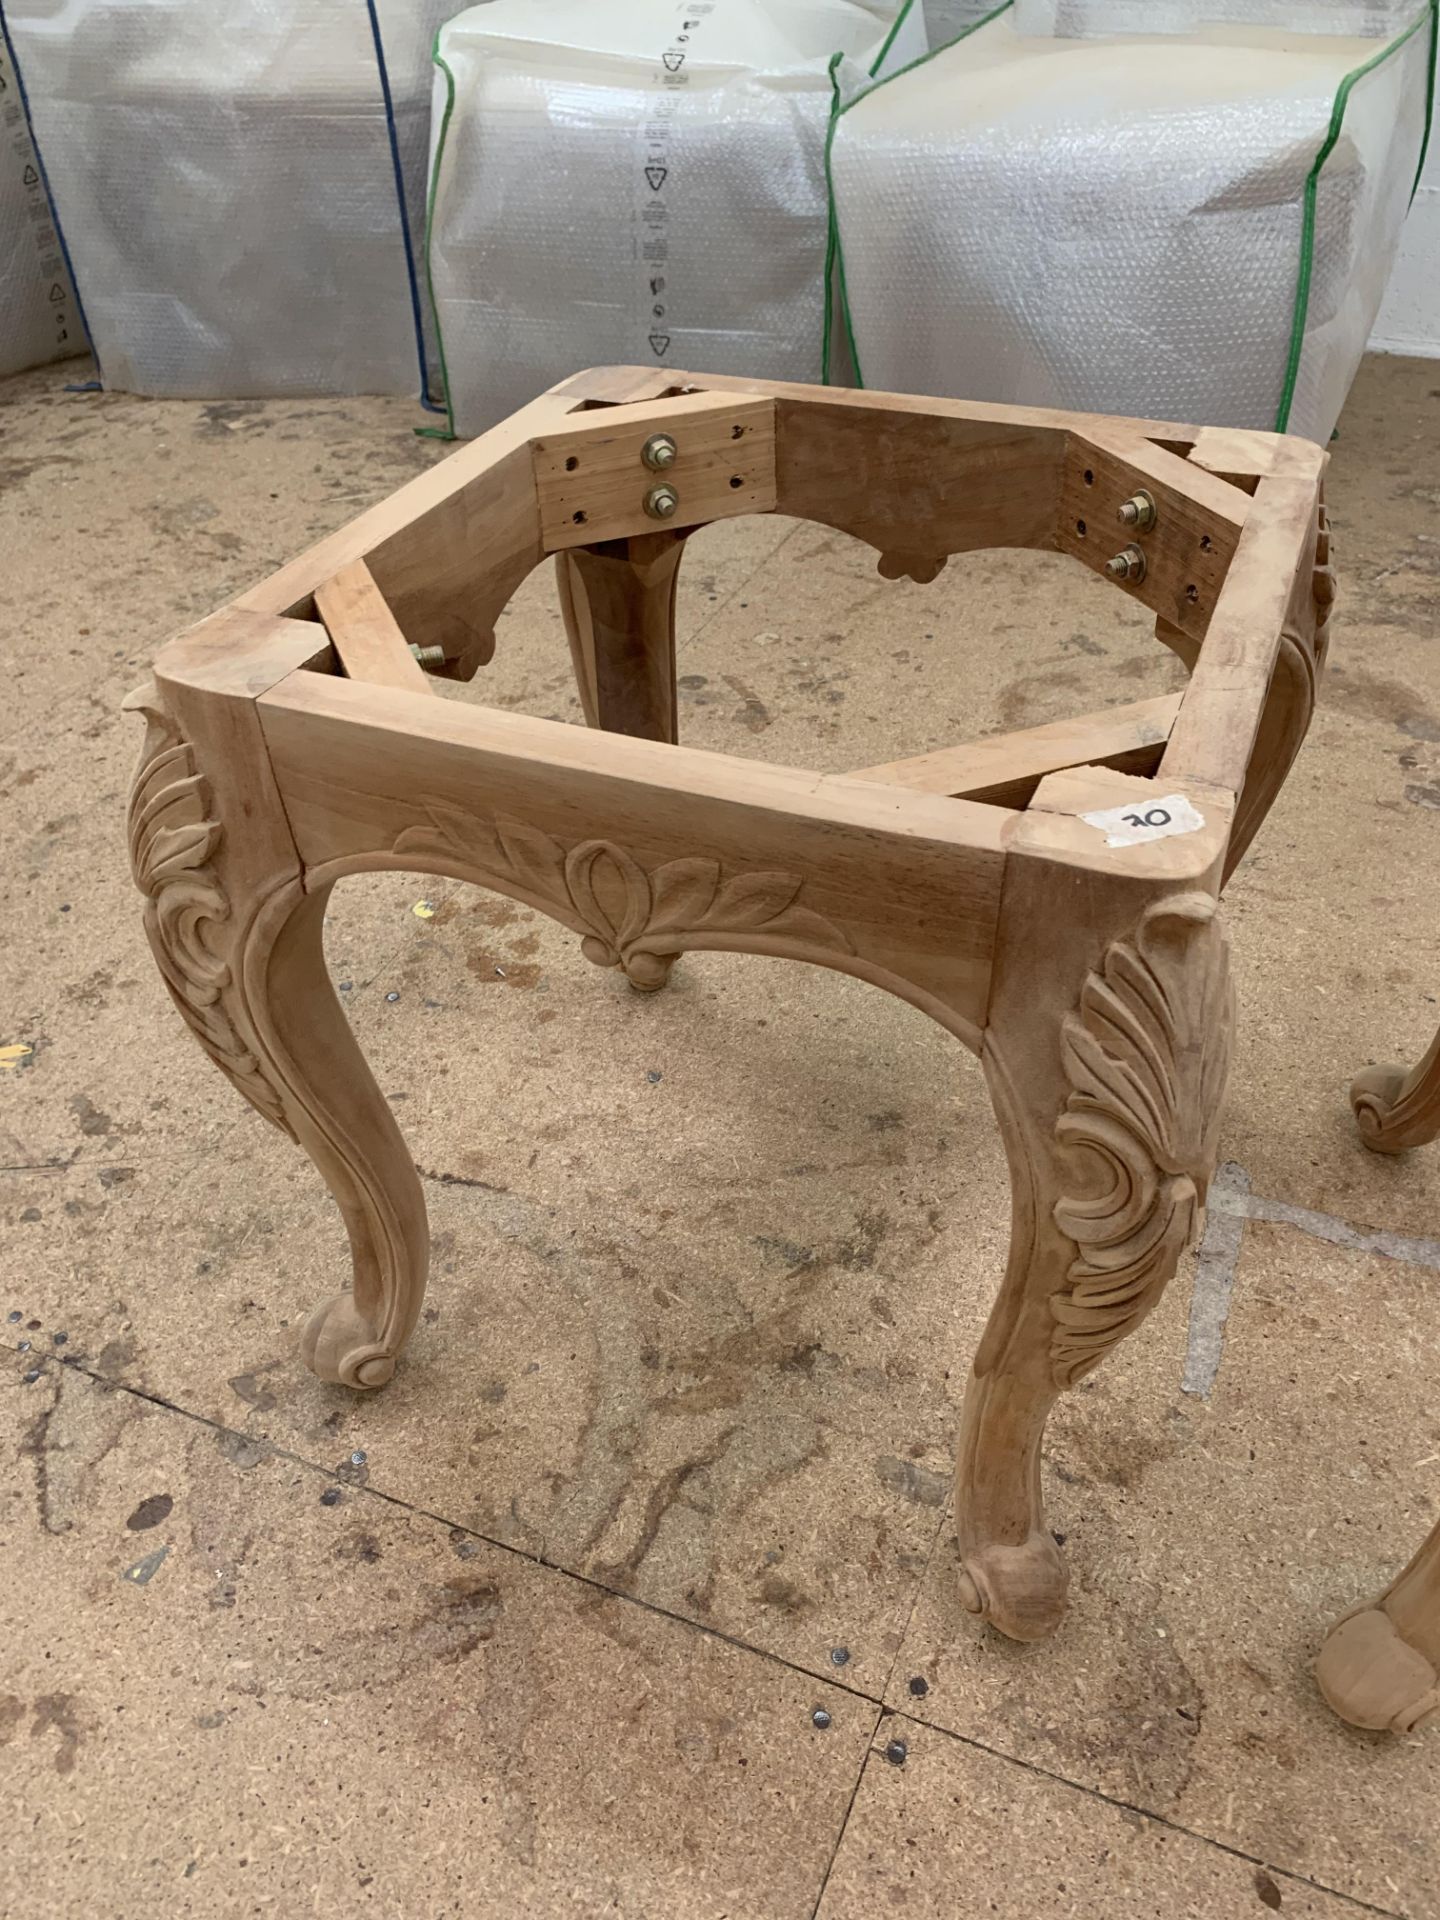 Carved square small Table or Stool base, approx 2', requires finishing/polshing. - Image 2 of 5